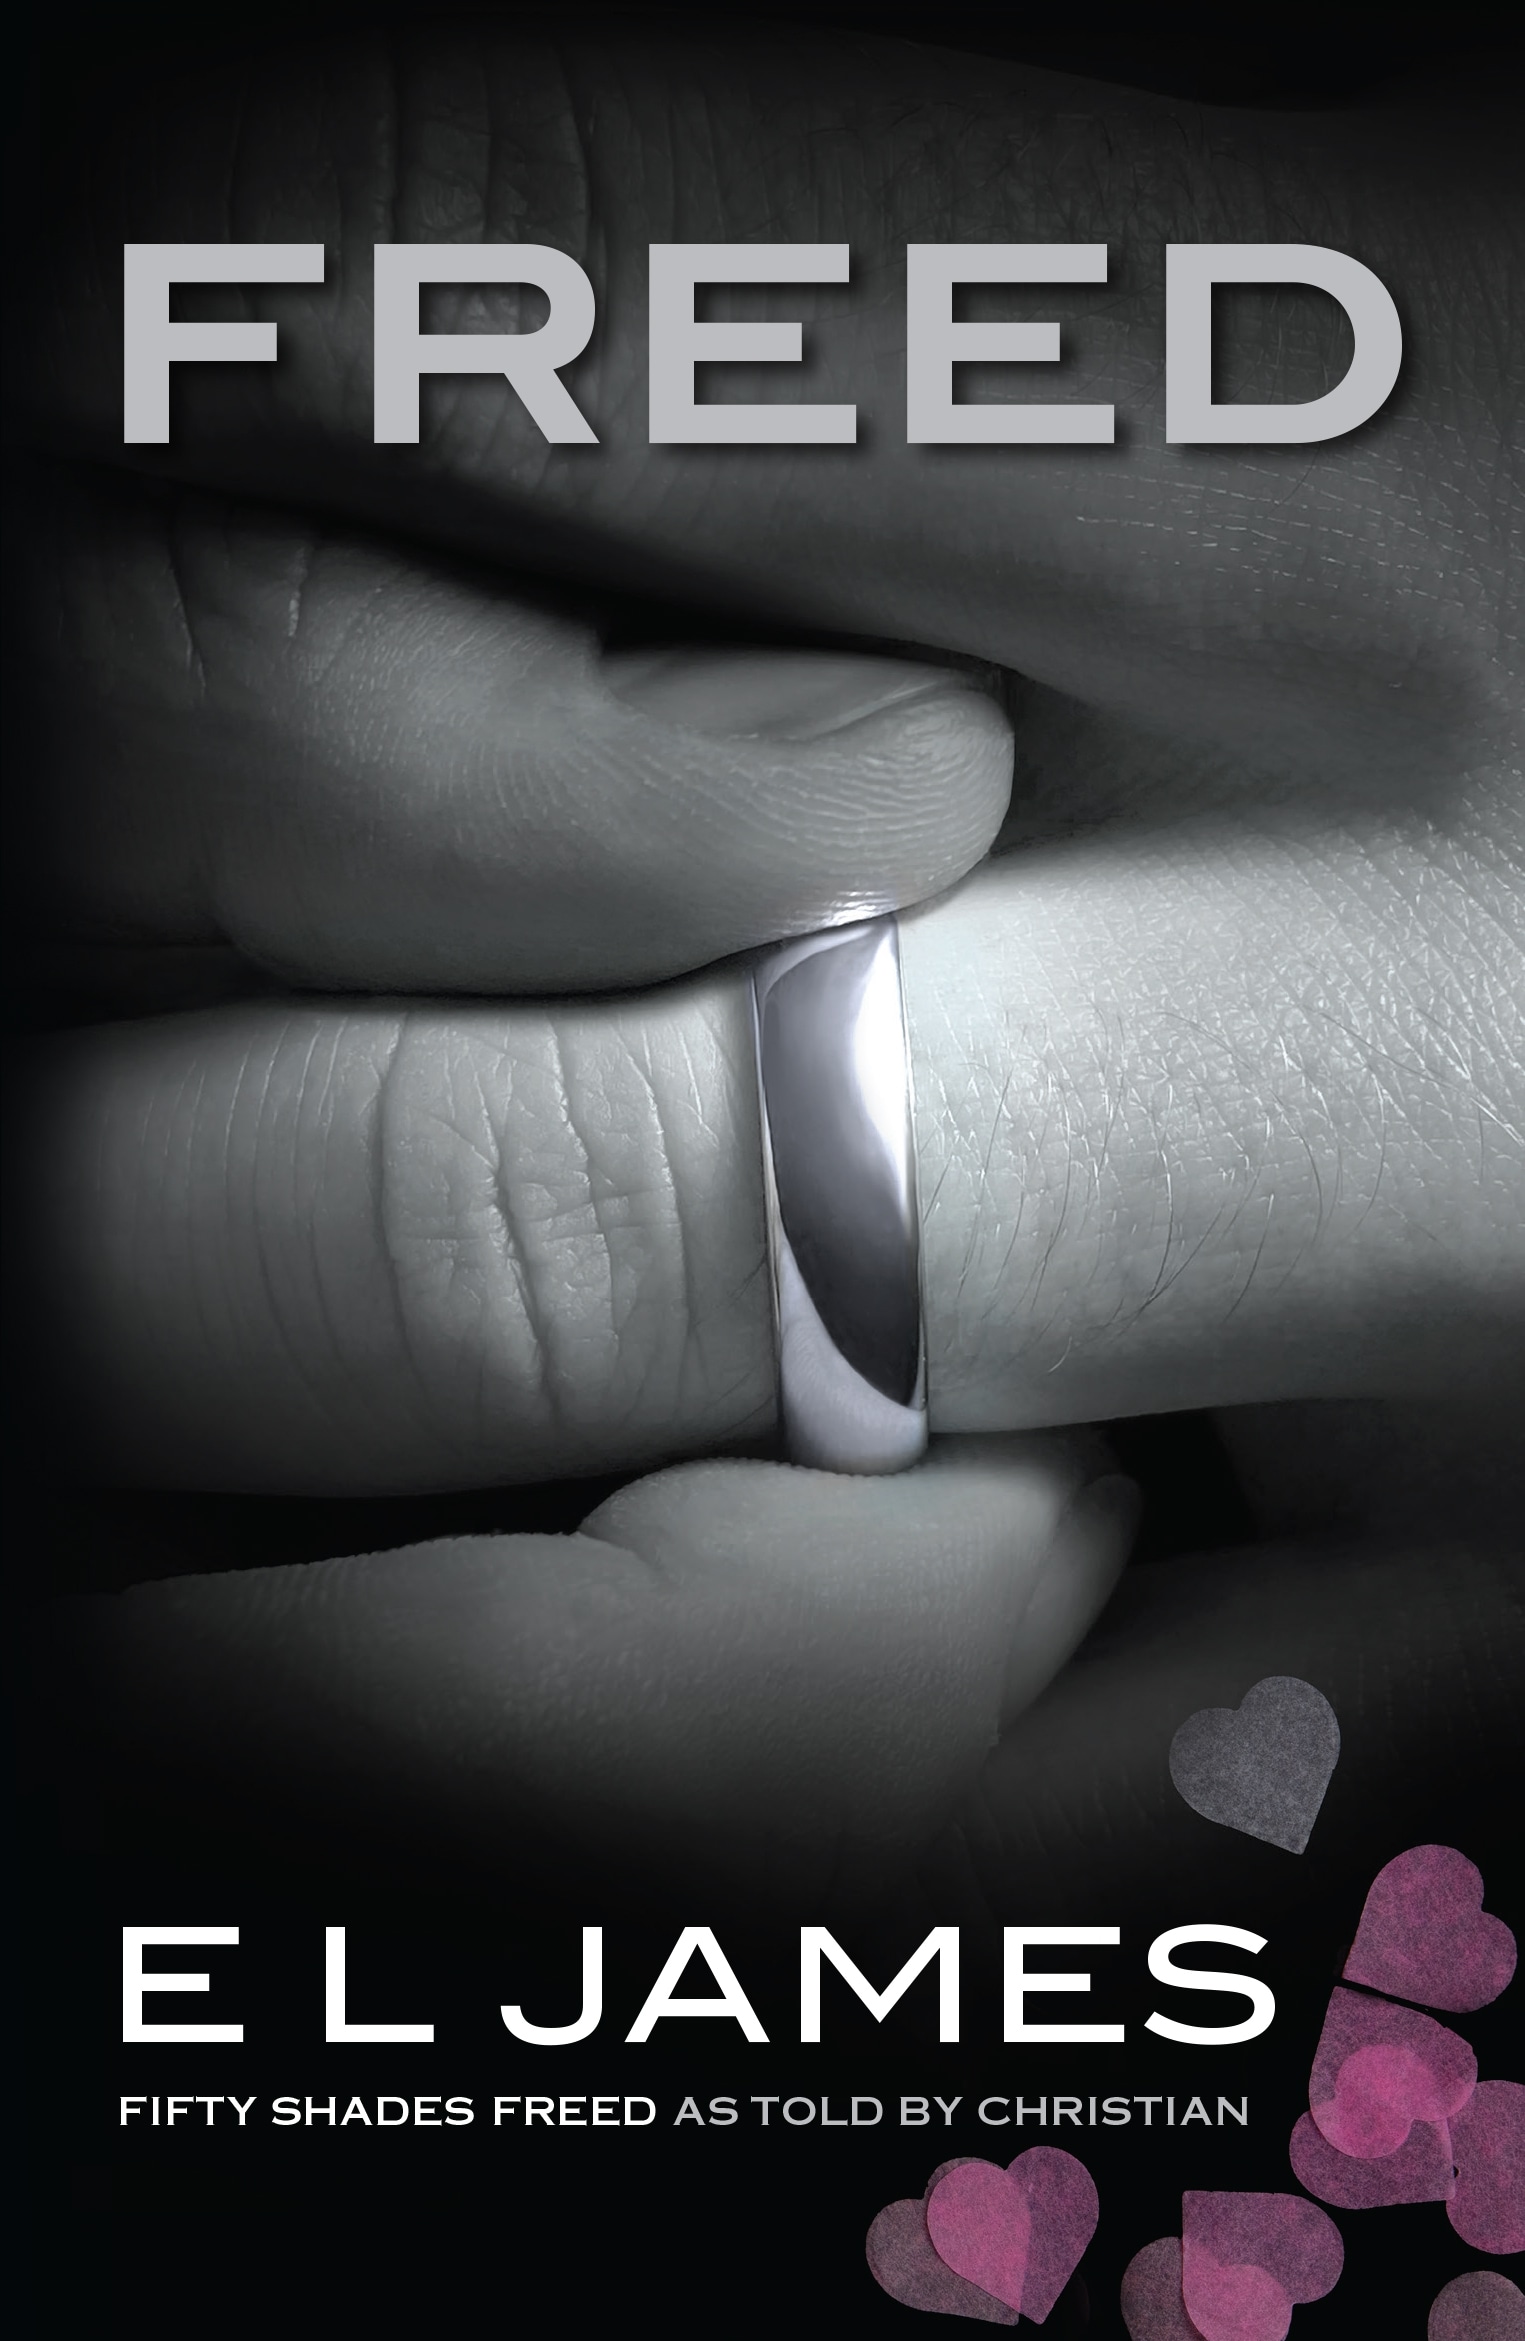 Book “Freed” by E L James — June 1, 2021